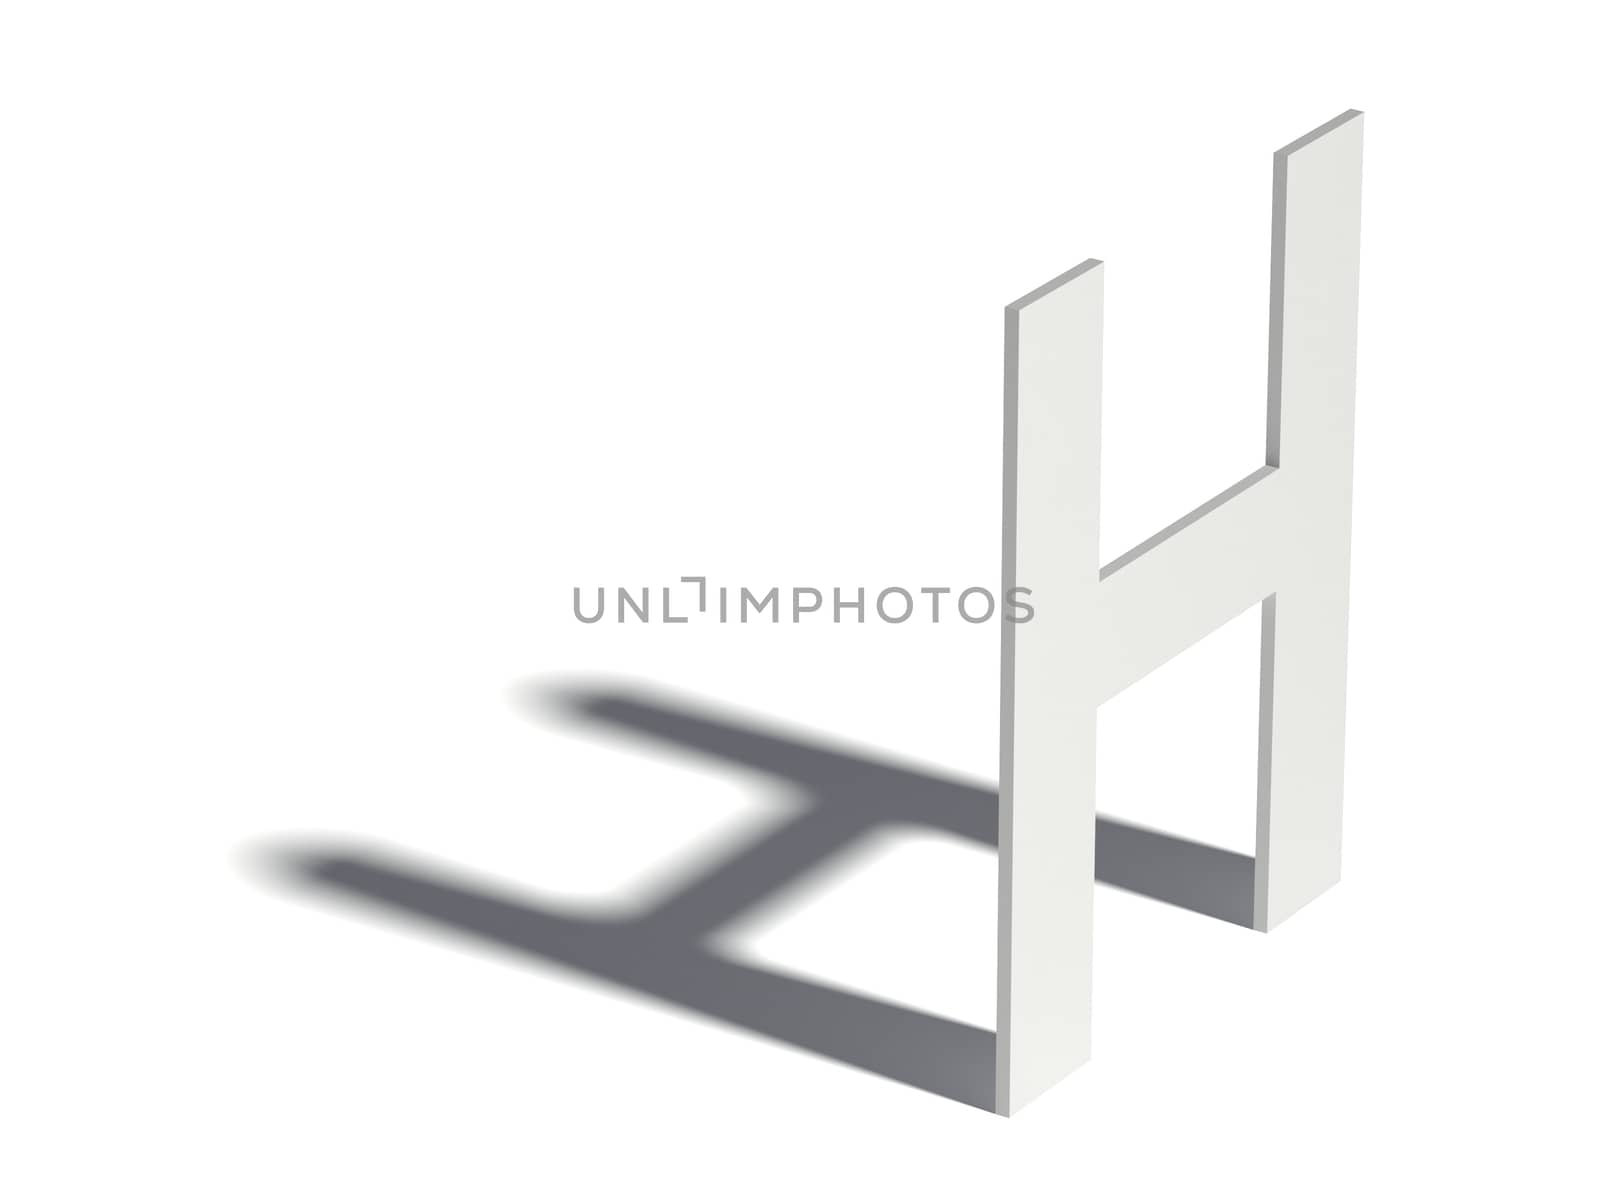 Drop shadow font. Letter H. 3D render illustration isolated on white background